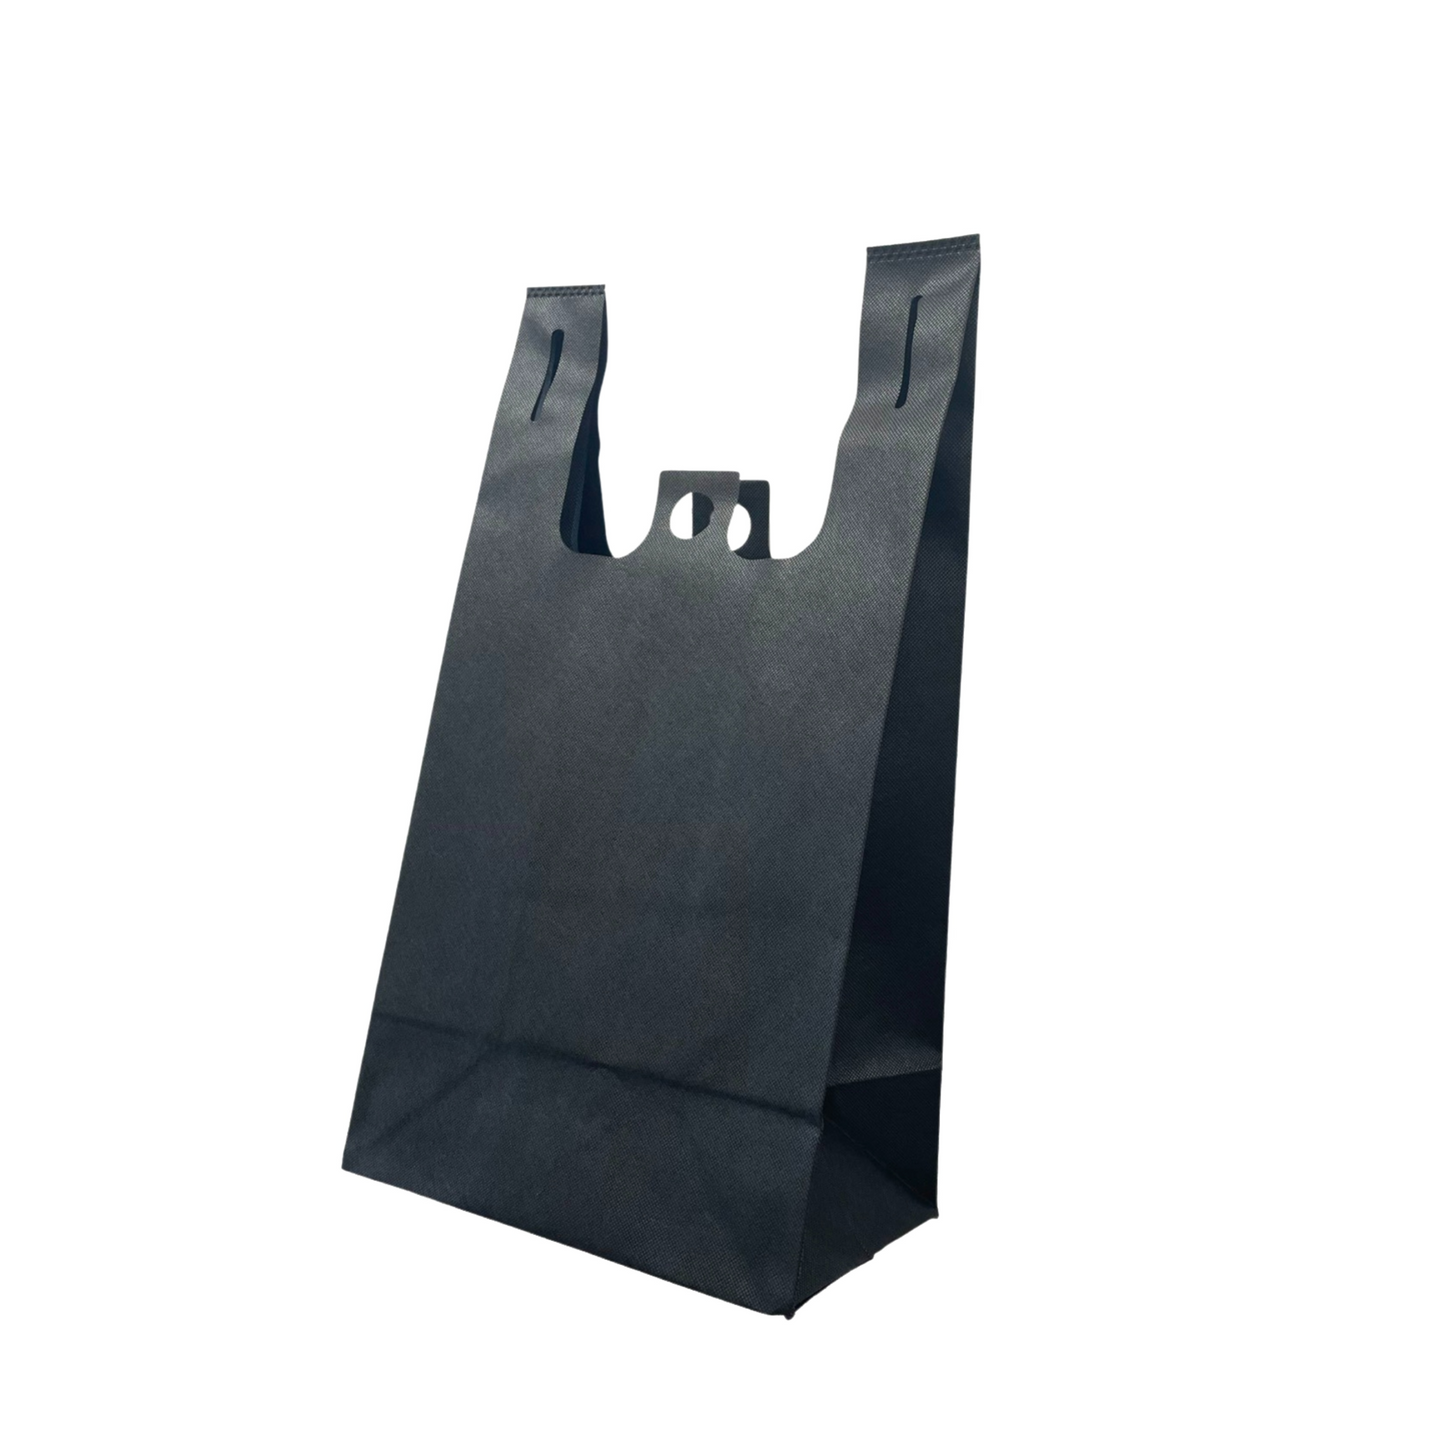 200pcs, T-Shirt Bag, 11x7x20x7 inches, Black Non-Woven Reusable Shopping Bags, with Square Bottom